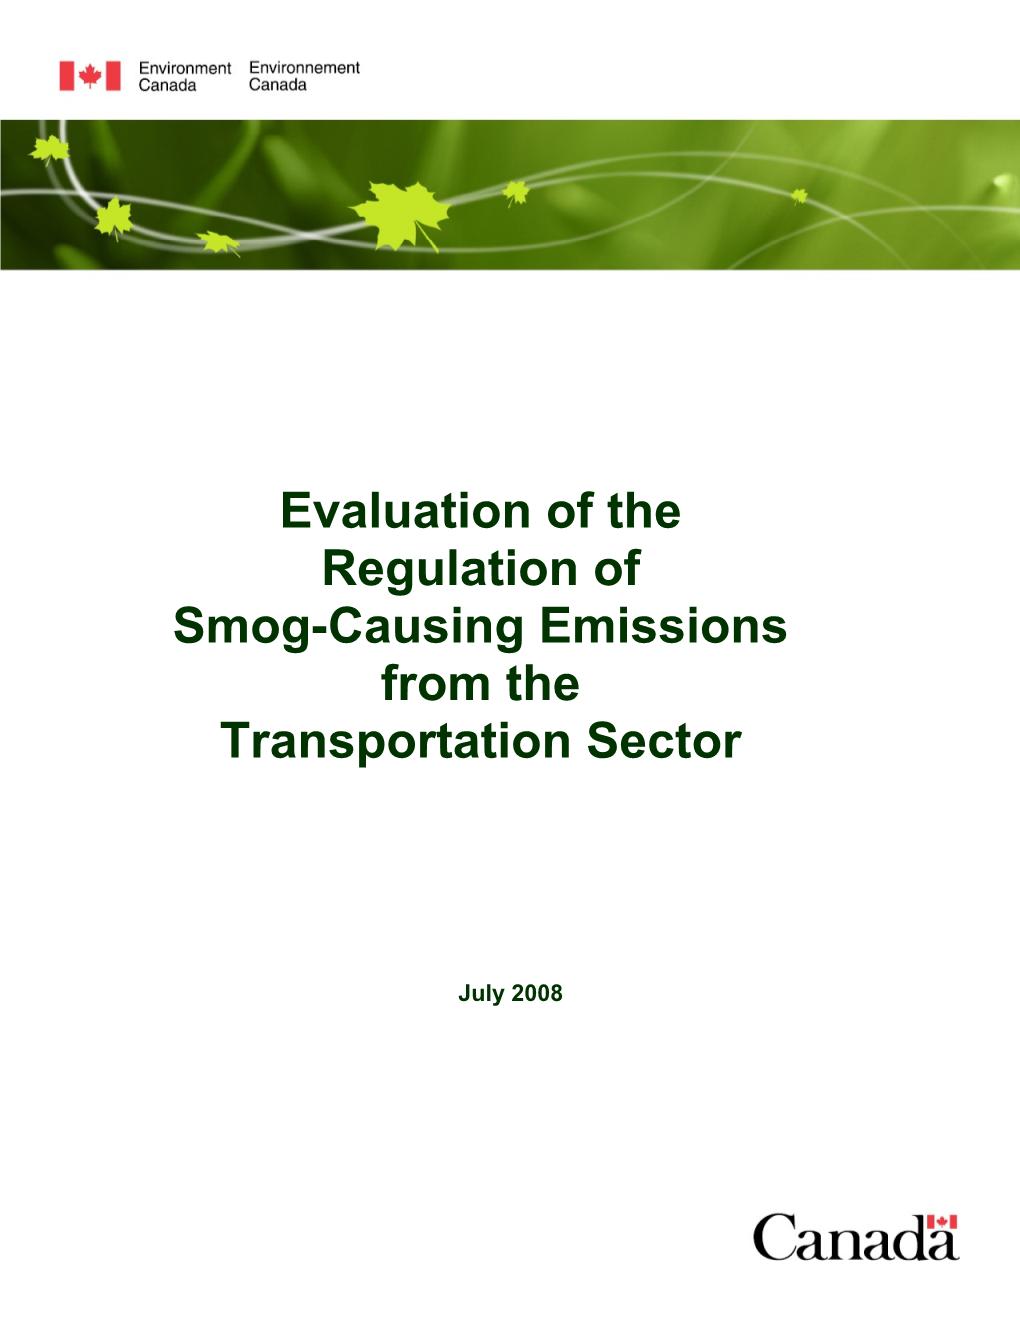 Evaluation of the Smog-Causing Emission Regulations in the Transportation Sector